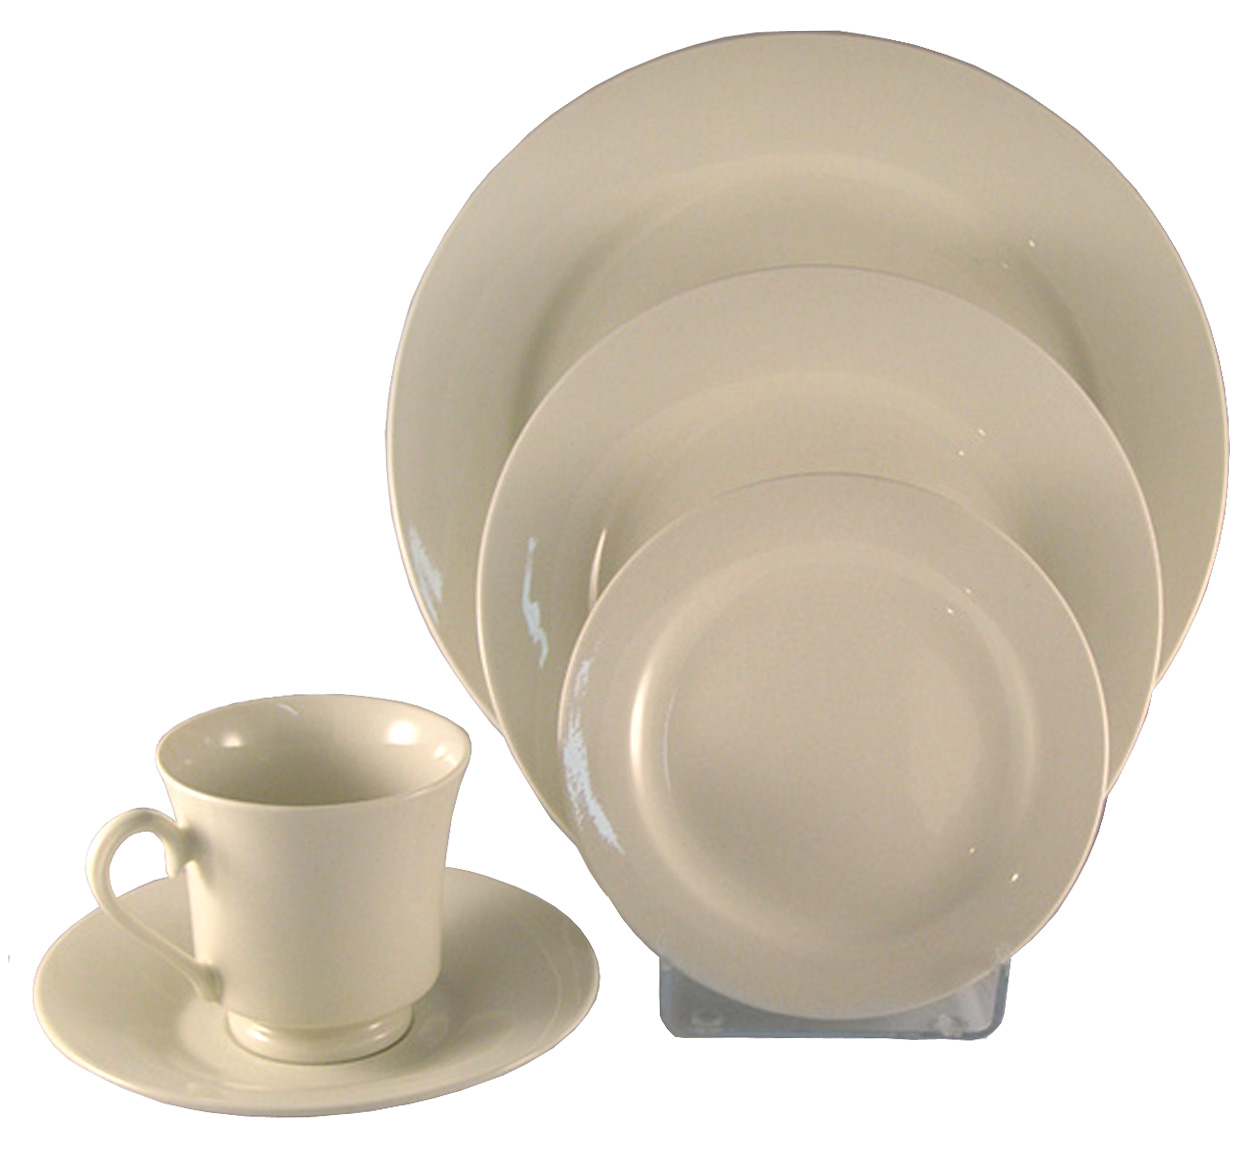 6 inch plate